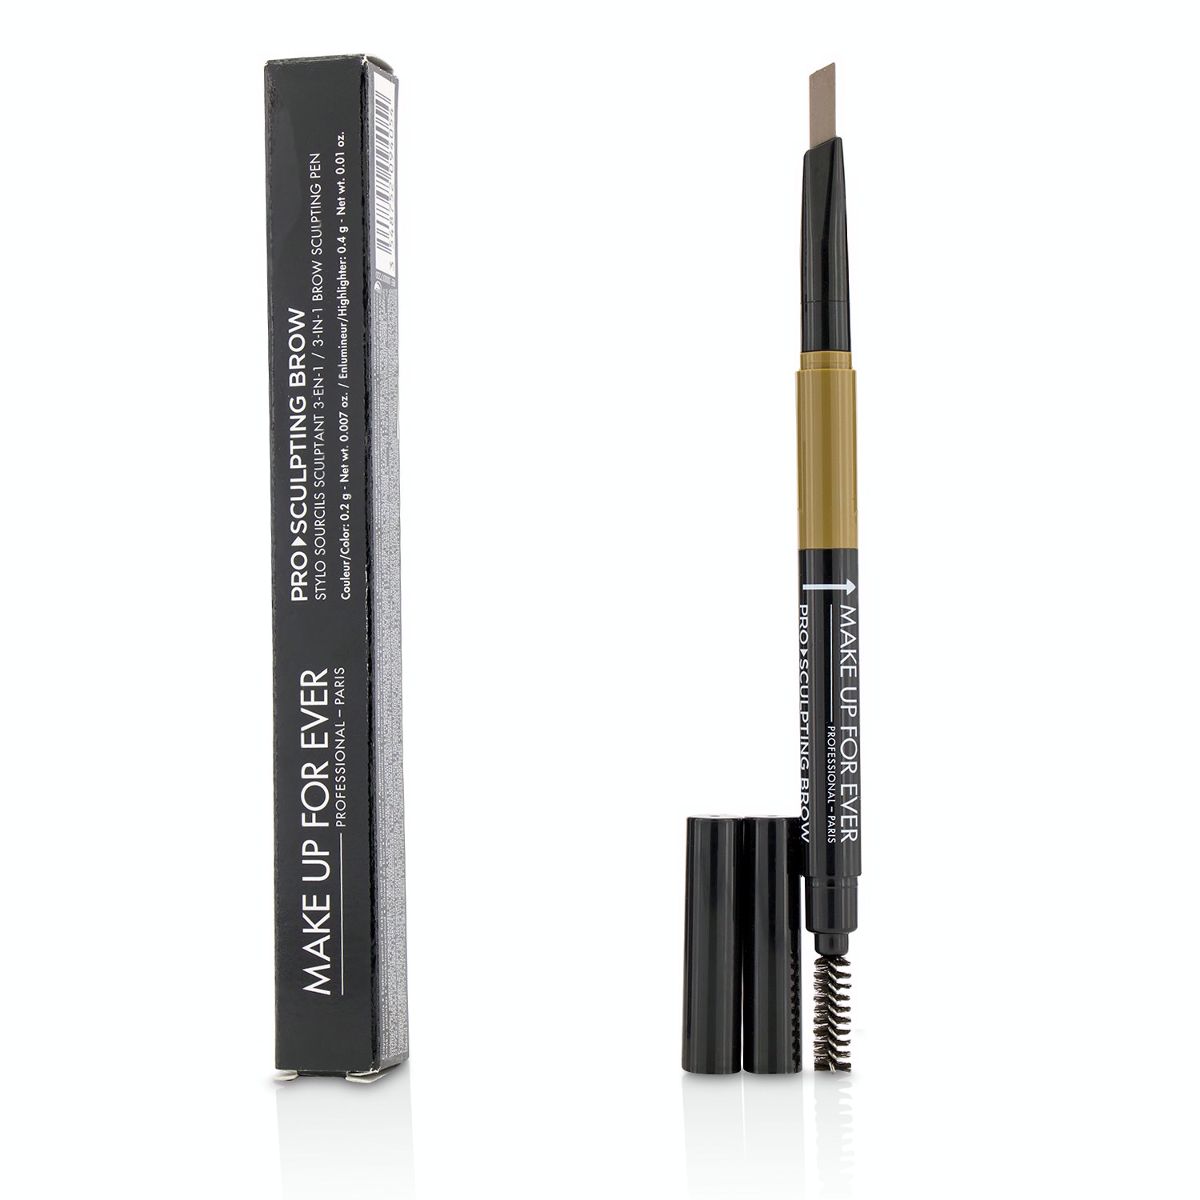 Pro Sculpting Brow 3 In 1 Brow Sculpting Pen - # 20 (Dark Blond) Make Up For Ever Image